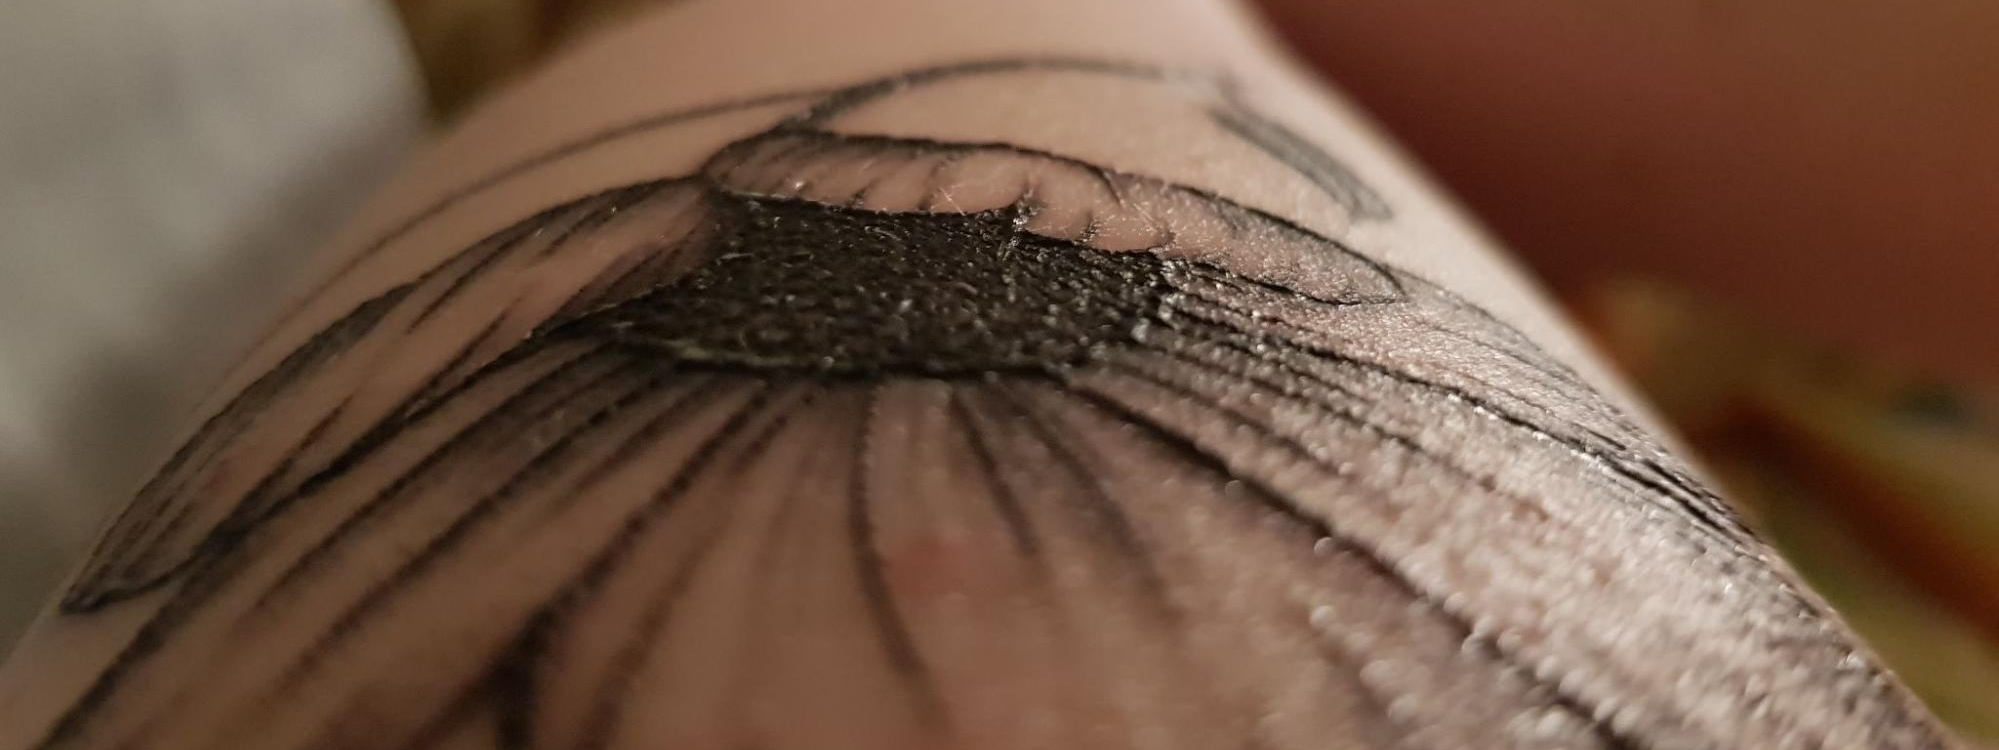 Why Your Tattoos Feel Itchy and Raised  Tattoo Irritation Causes  Allure